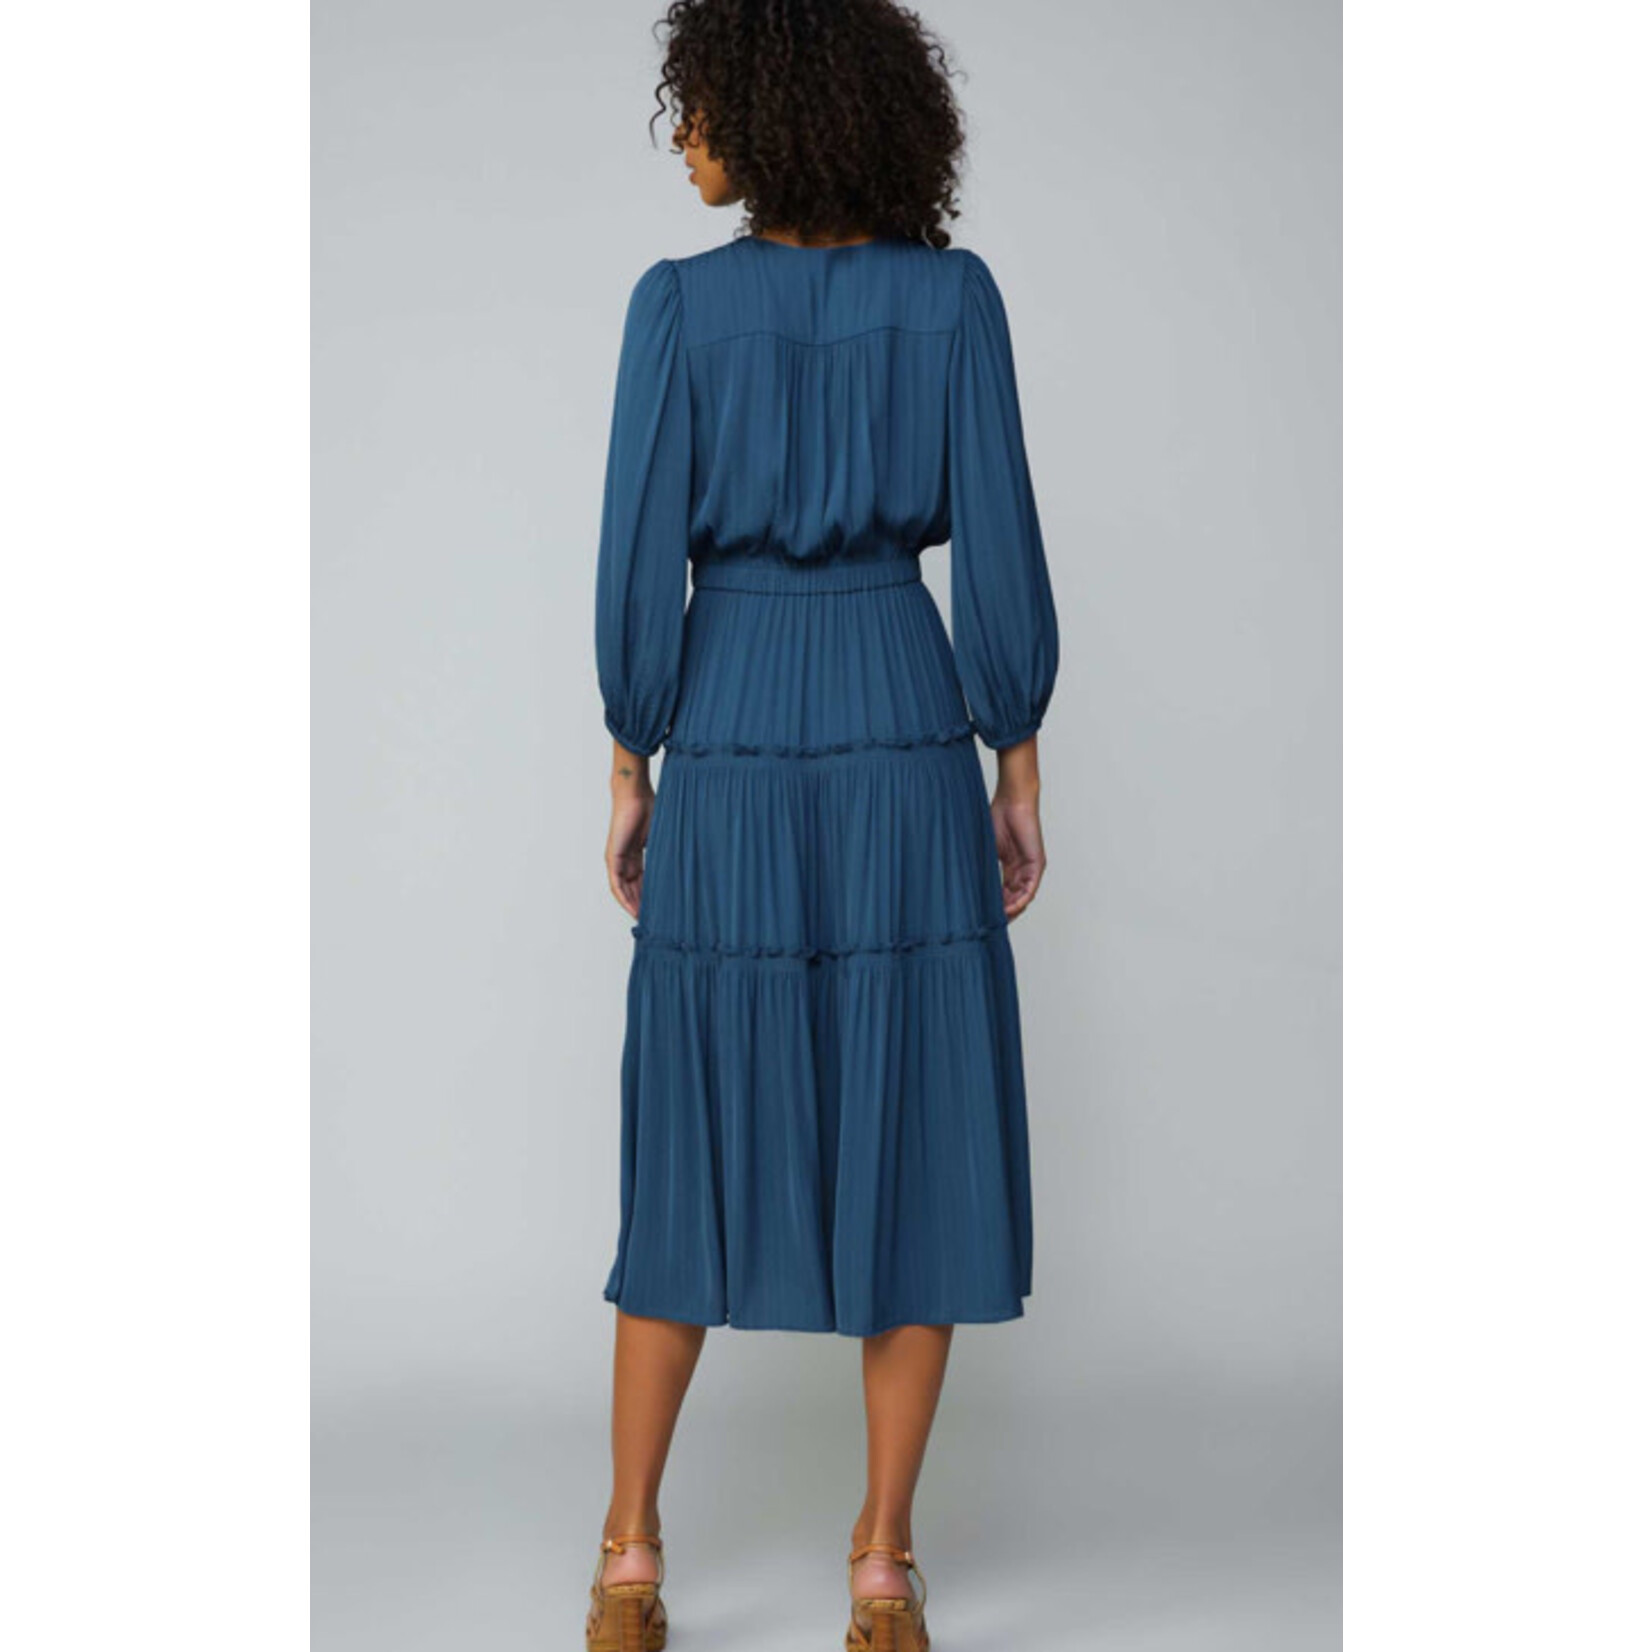 Current Air The Shay Dress